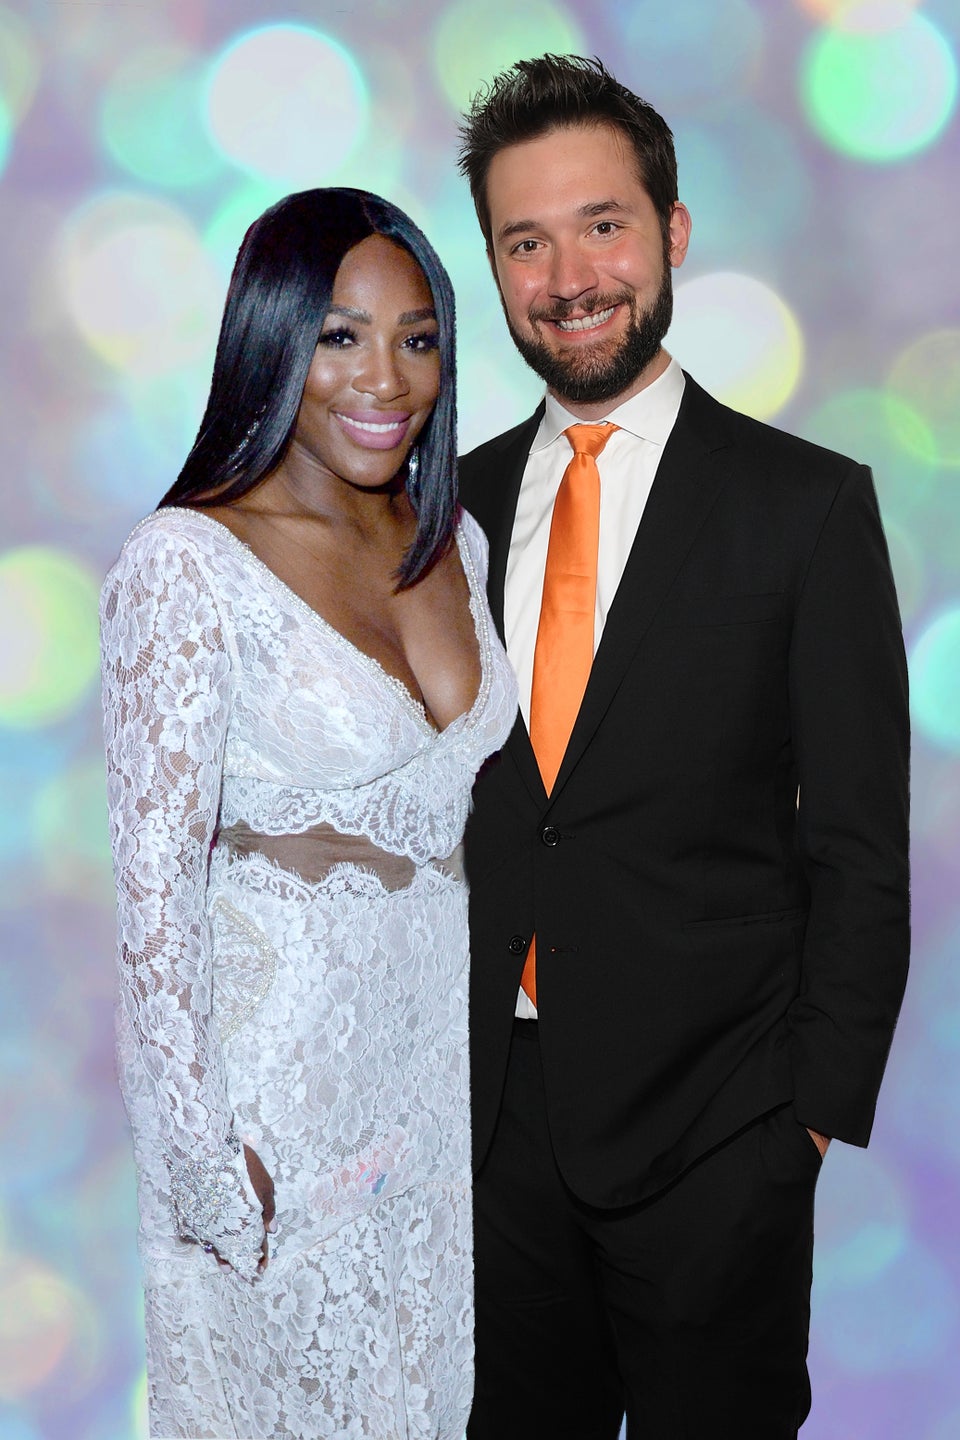 Serena Williams’ Husband Alexis Ohanian Penned The Sweetest Message After Her Wimbledon Loss: ‘She’s Just Getting Started’